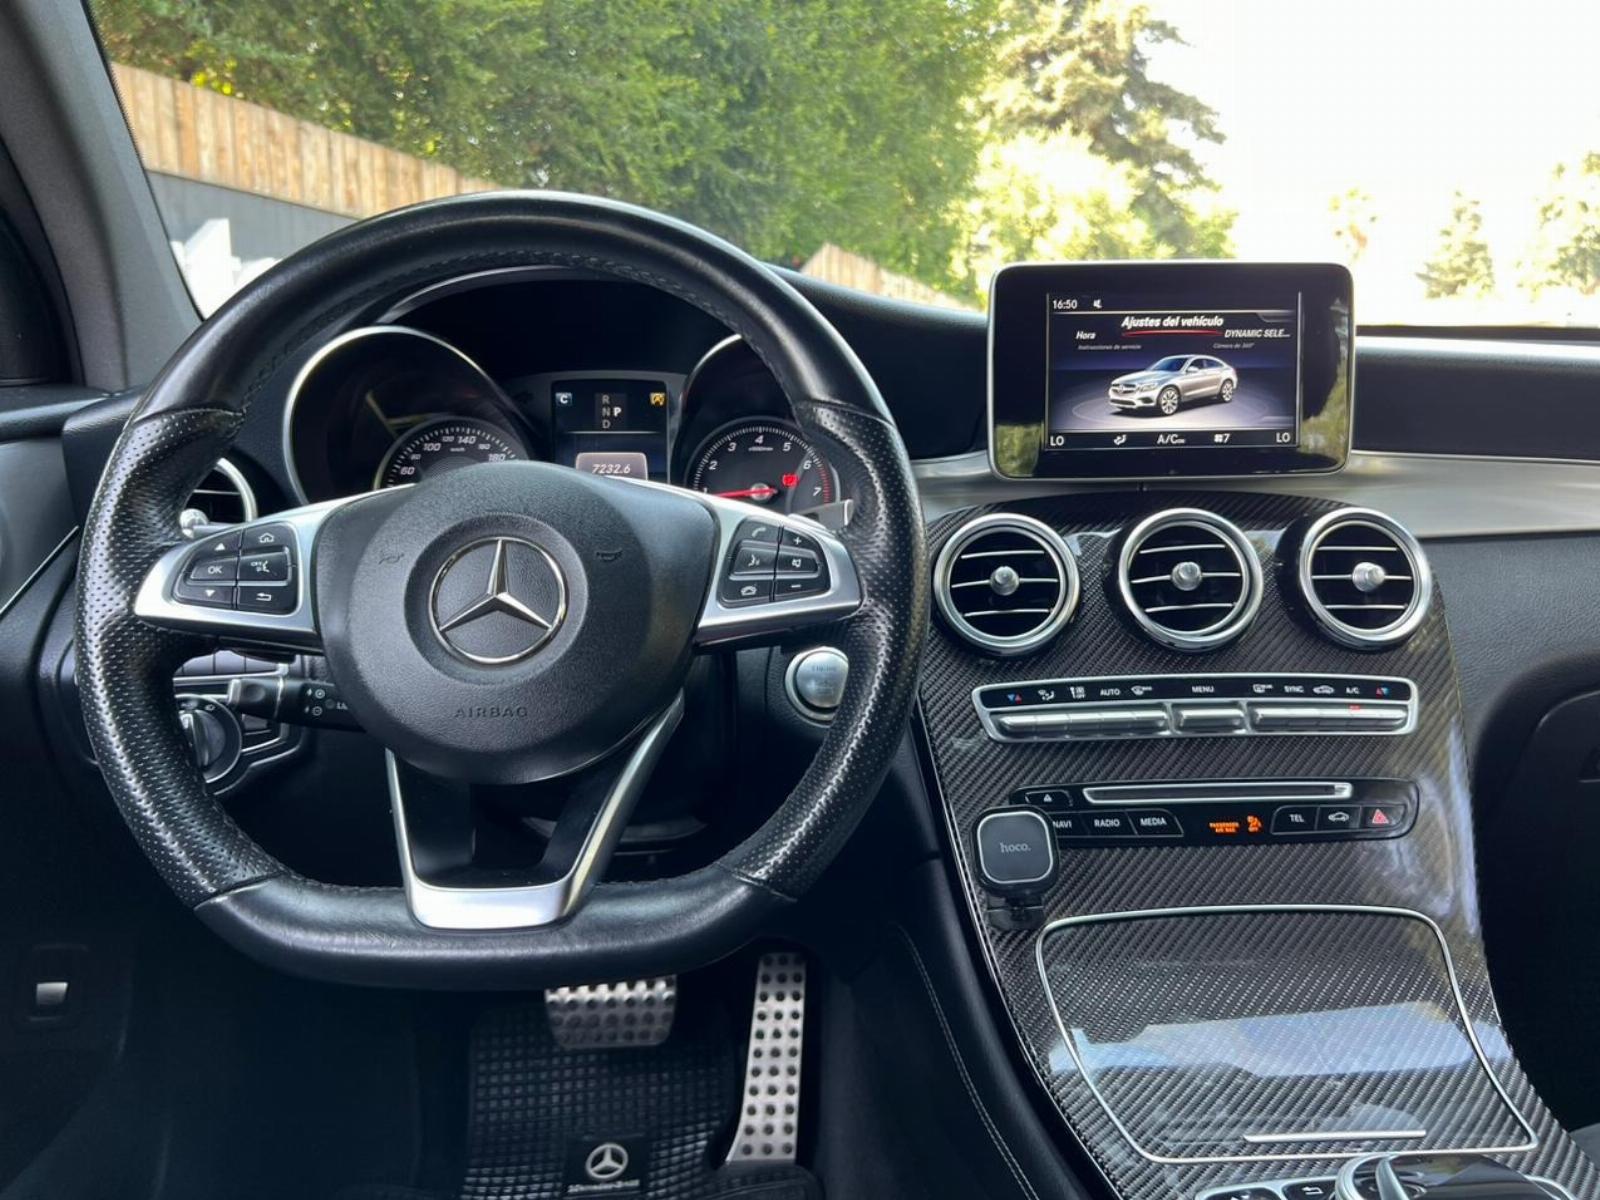 MERCEDES-BENZ GLC 300 COUPE 4MATIC 2019 VERSION COUPE - FULL MOTOR